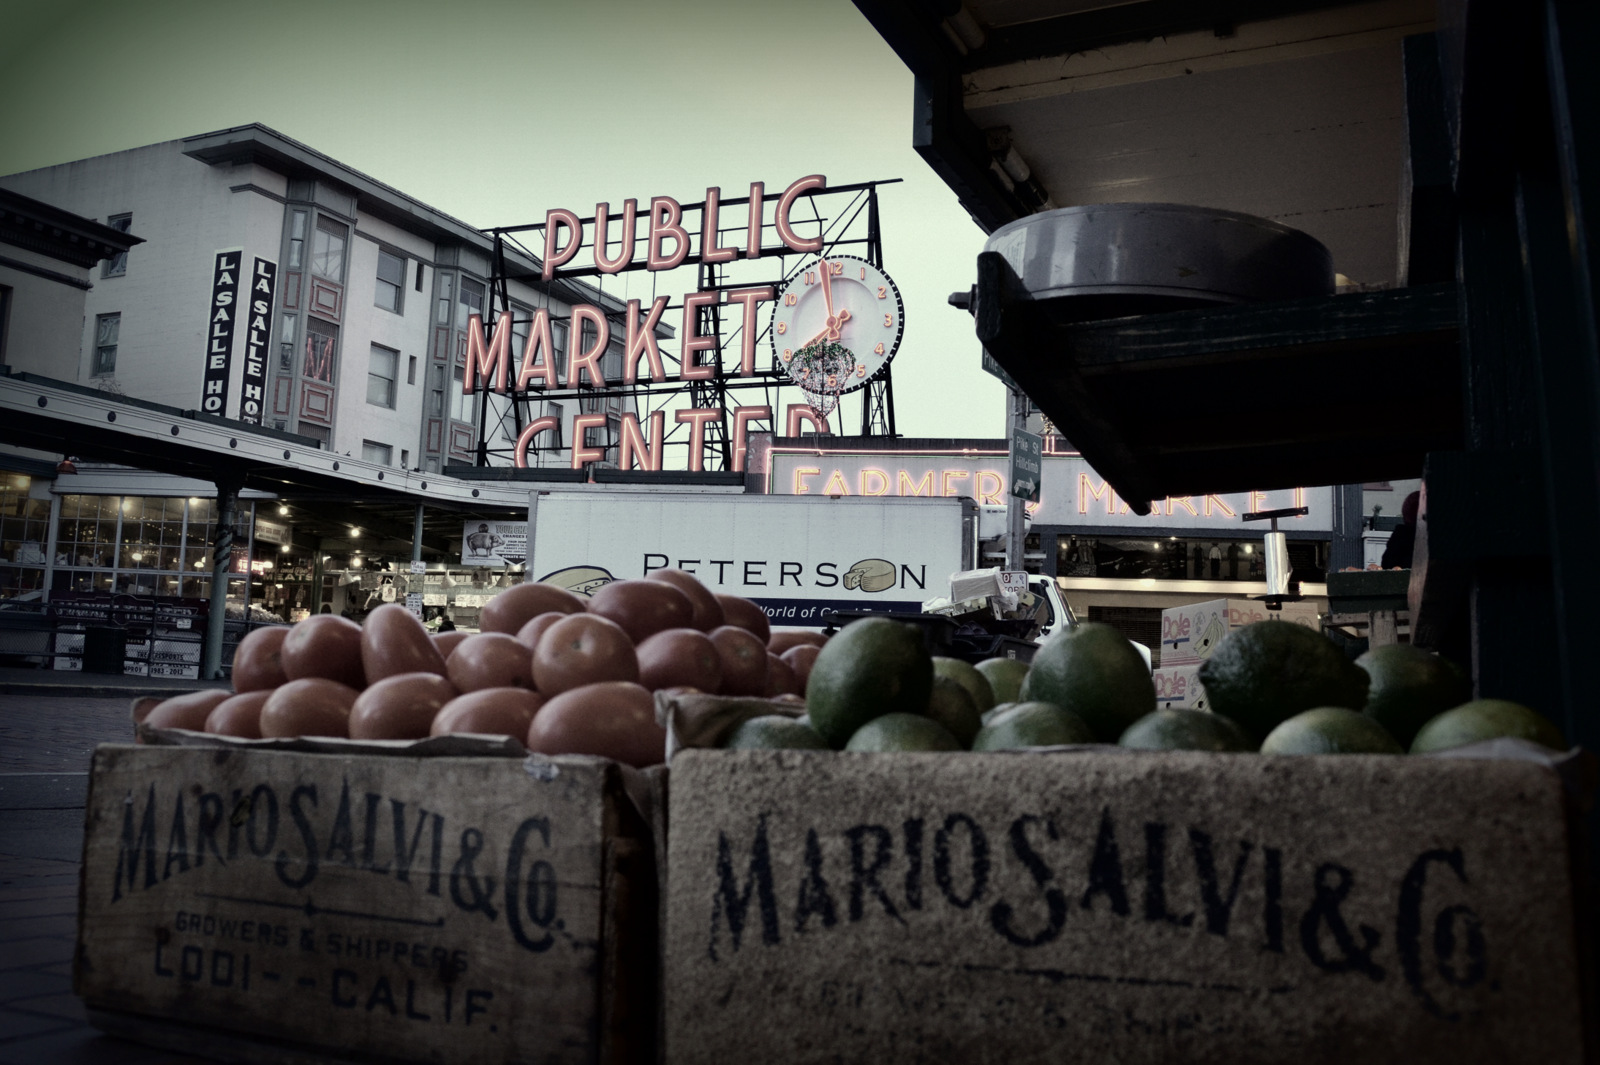 Pike place market sign produce